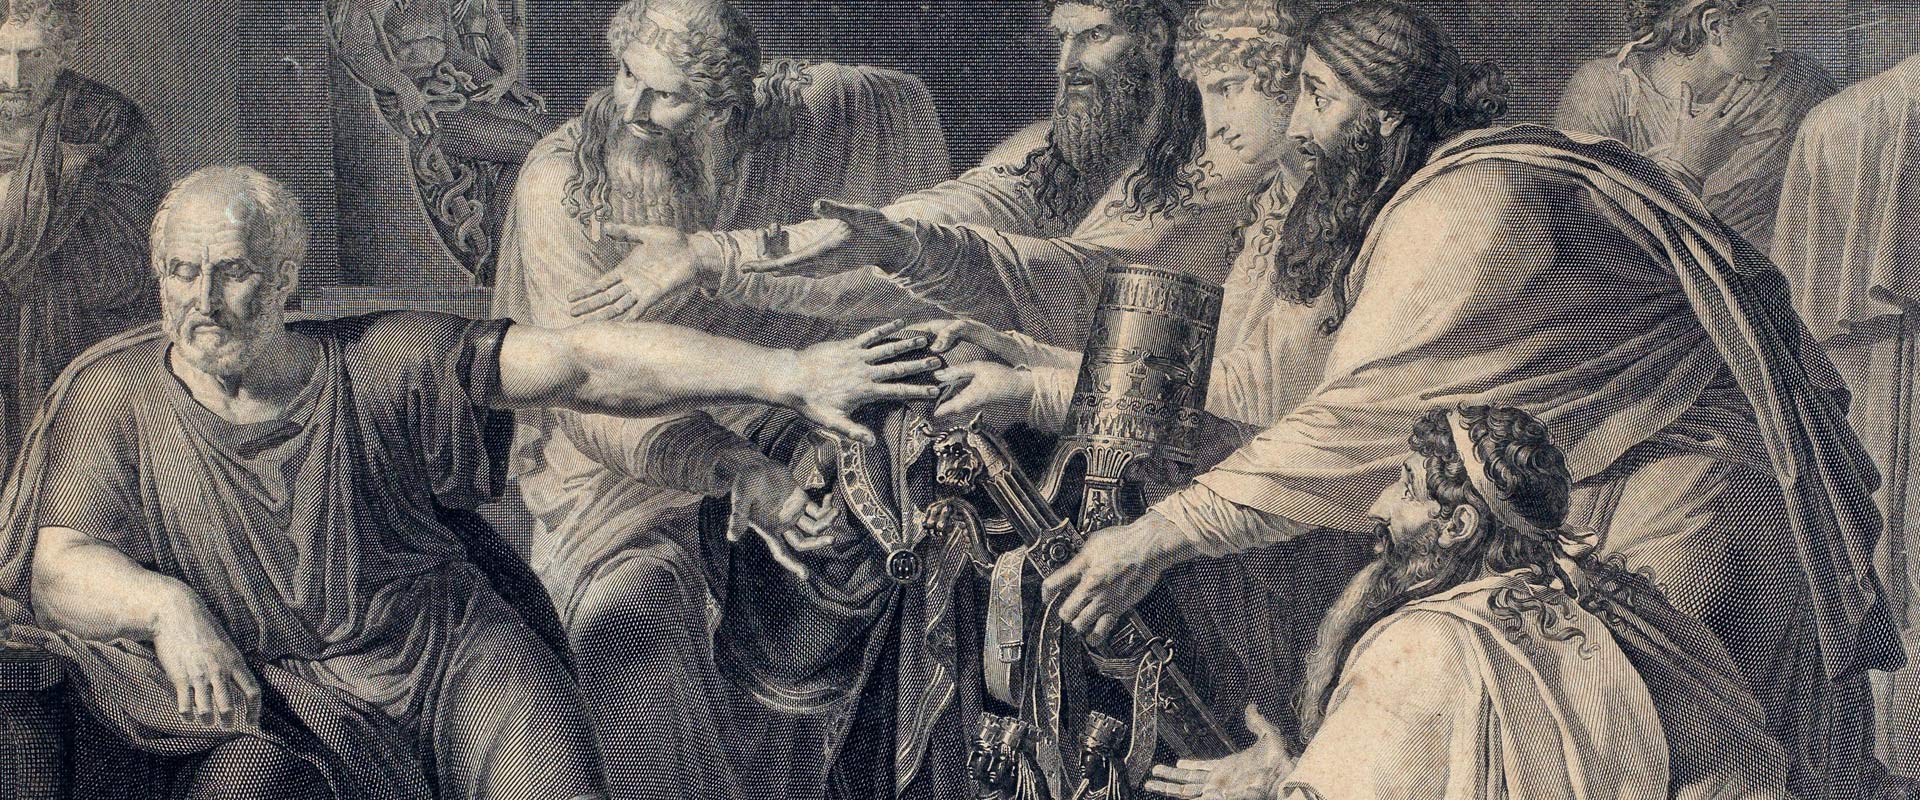 image of Hippocrates refusing the gifts of Artaxerxes